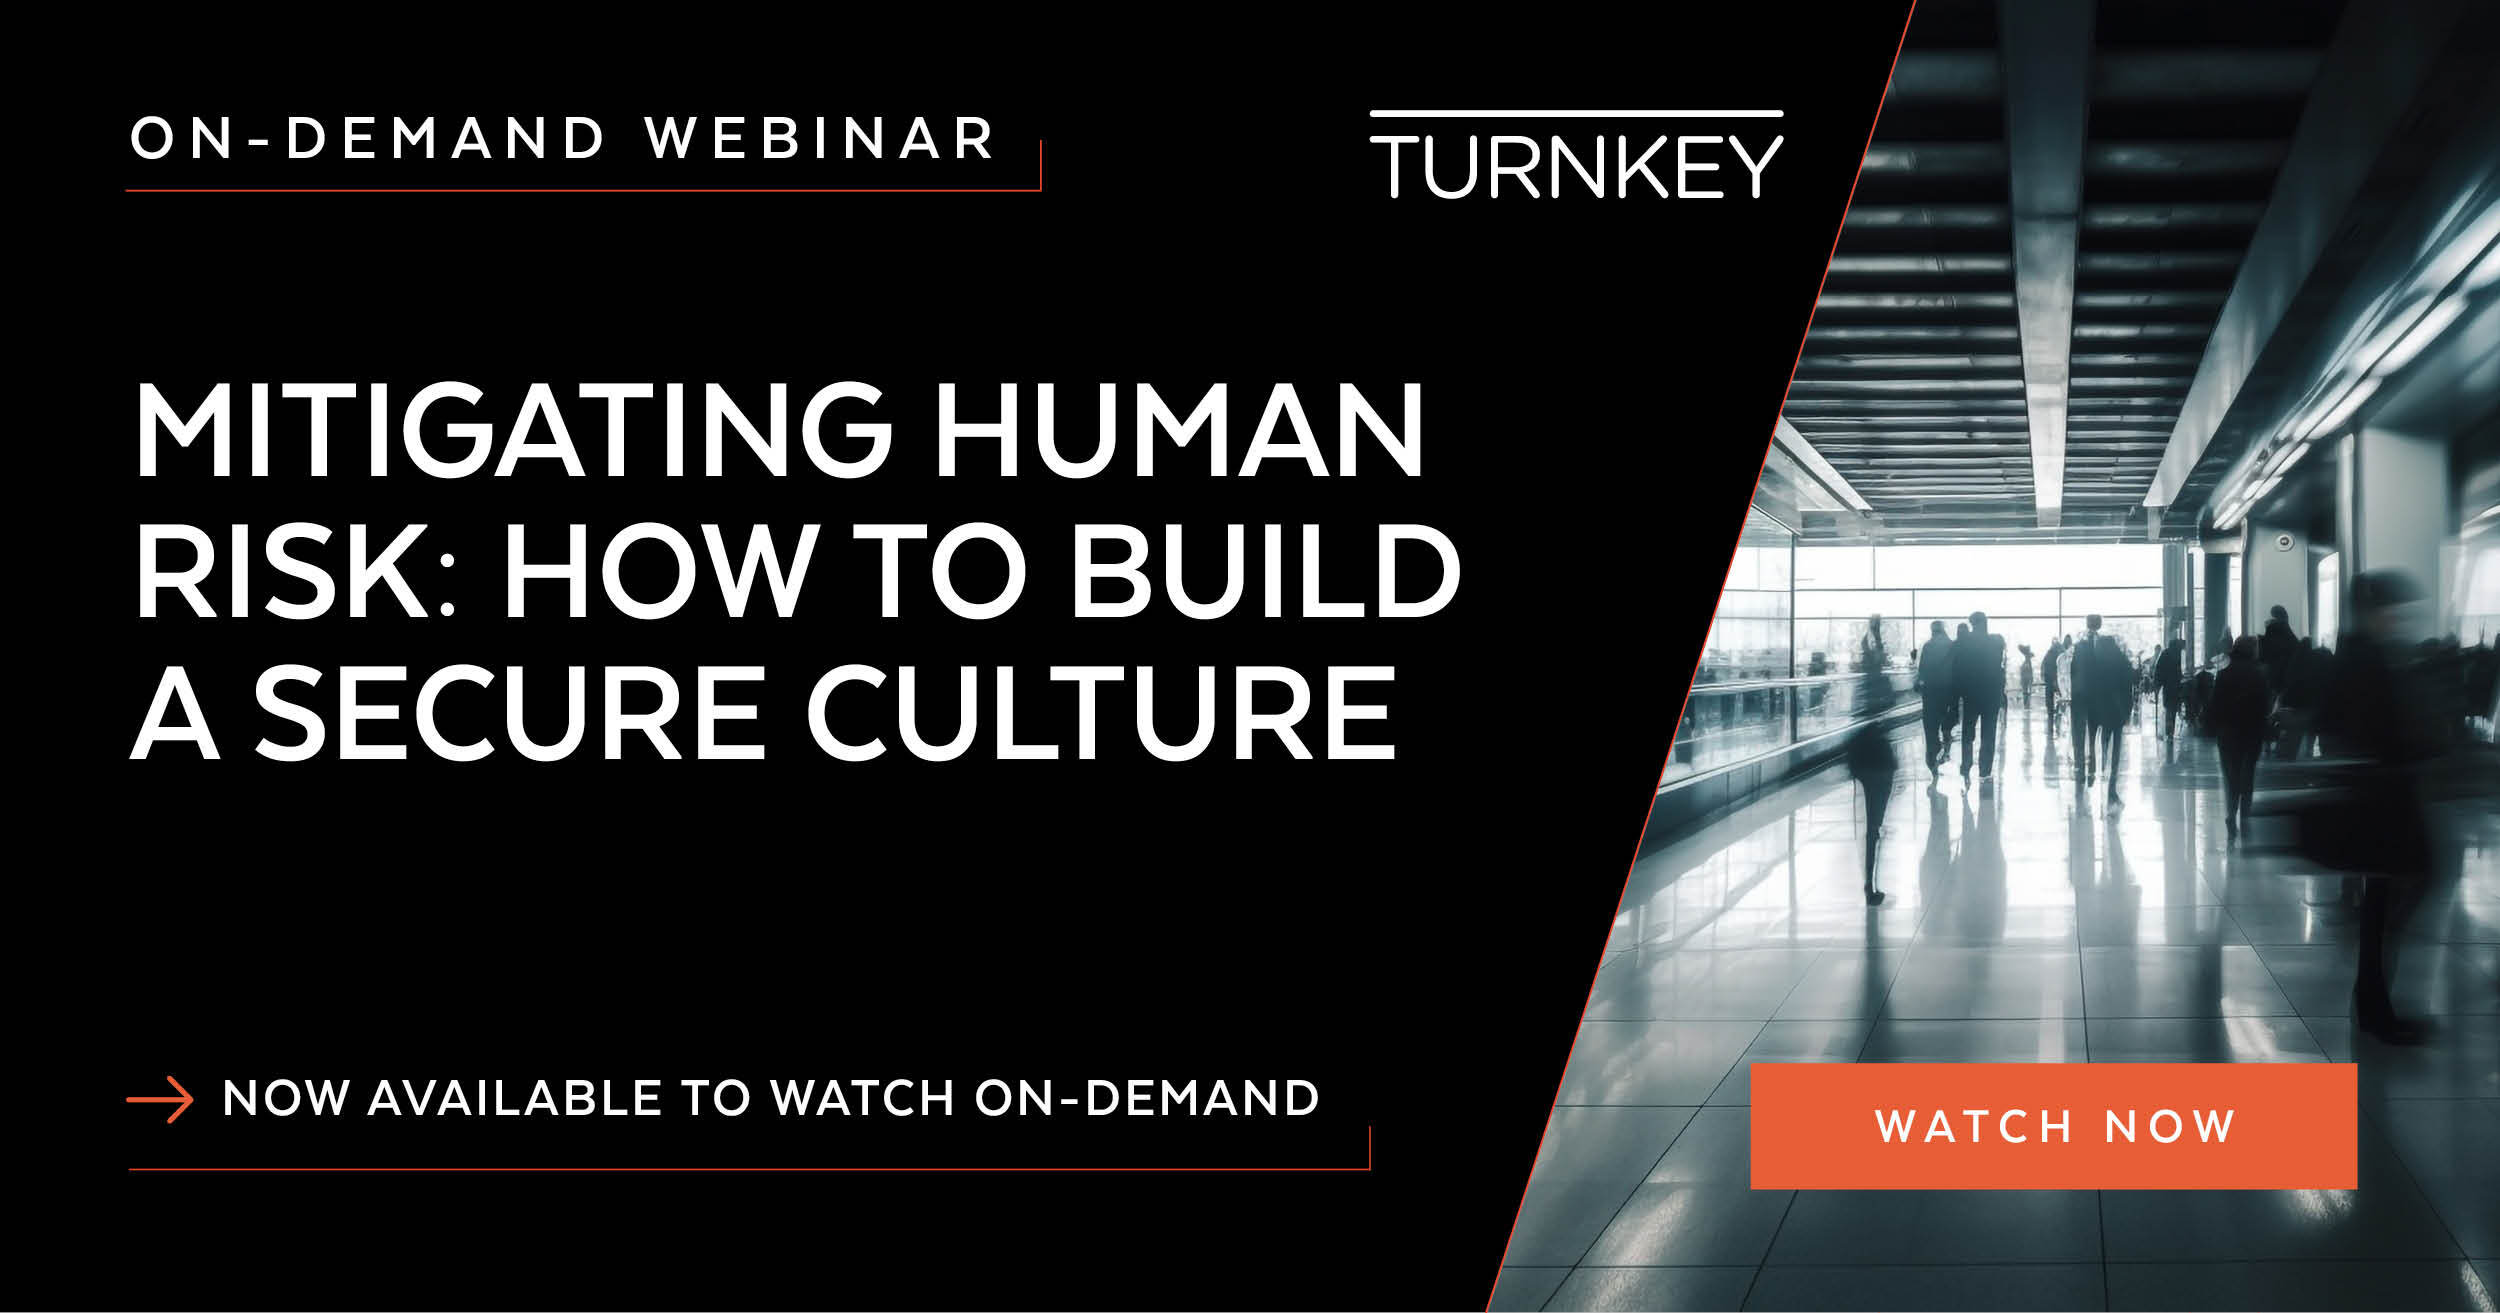 Turnkey Mitigating Human Risk-How to build a secure culture ondemand